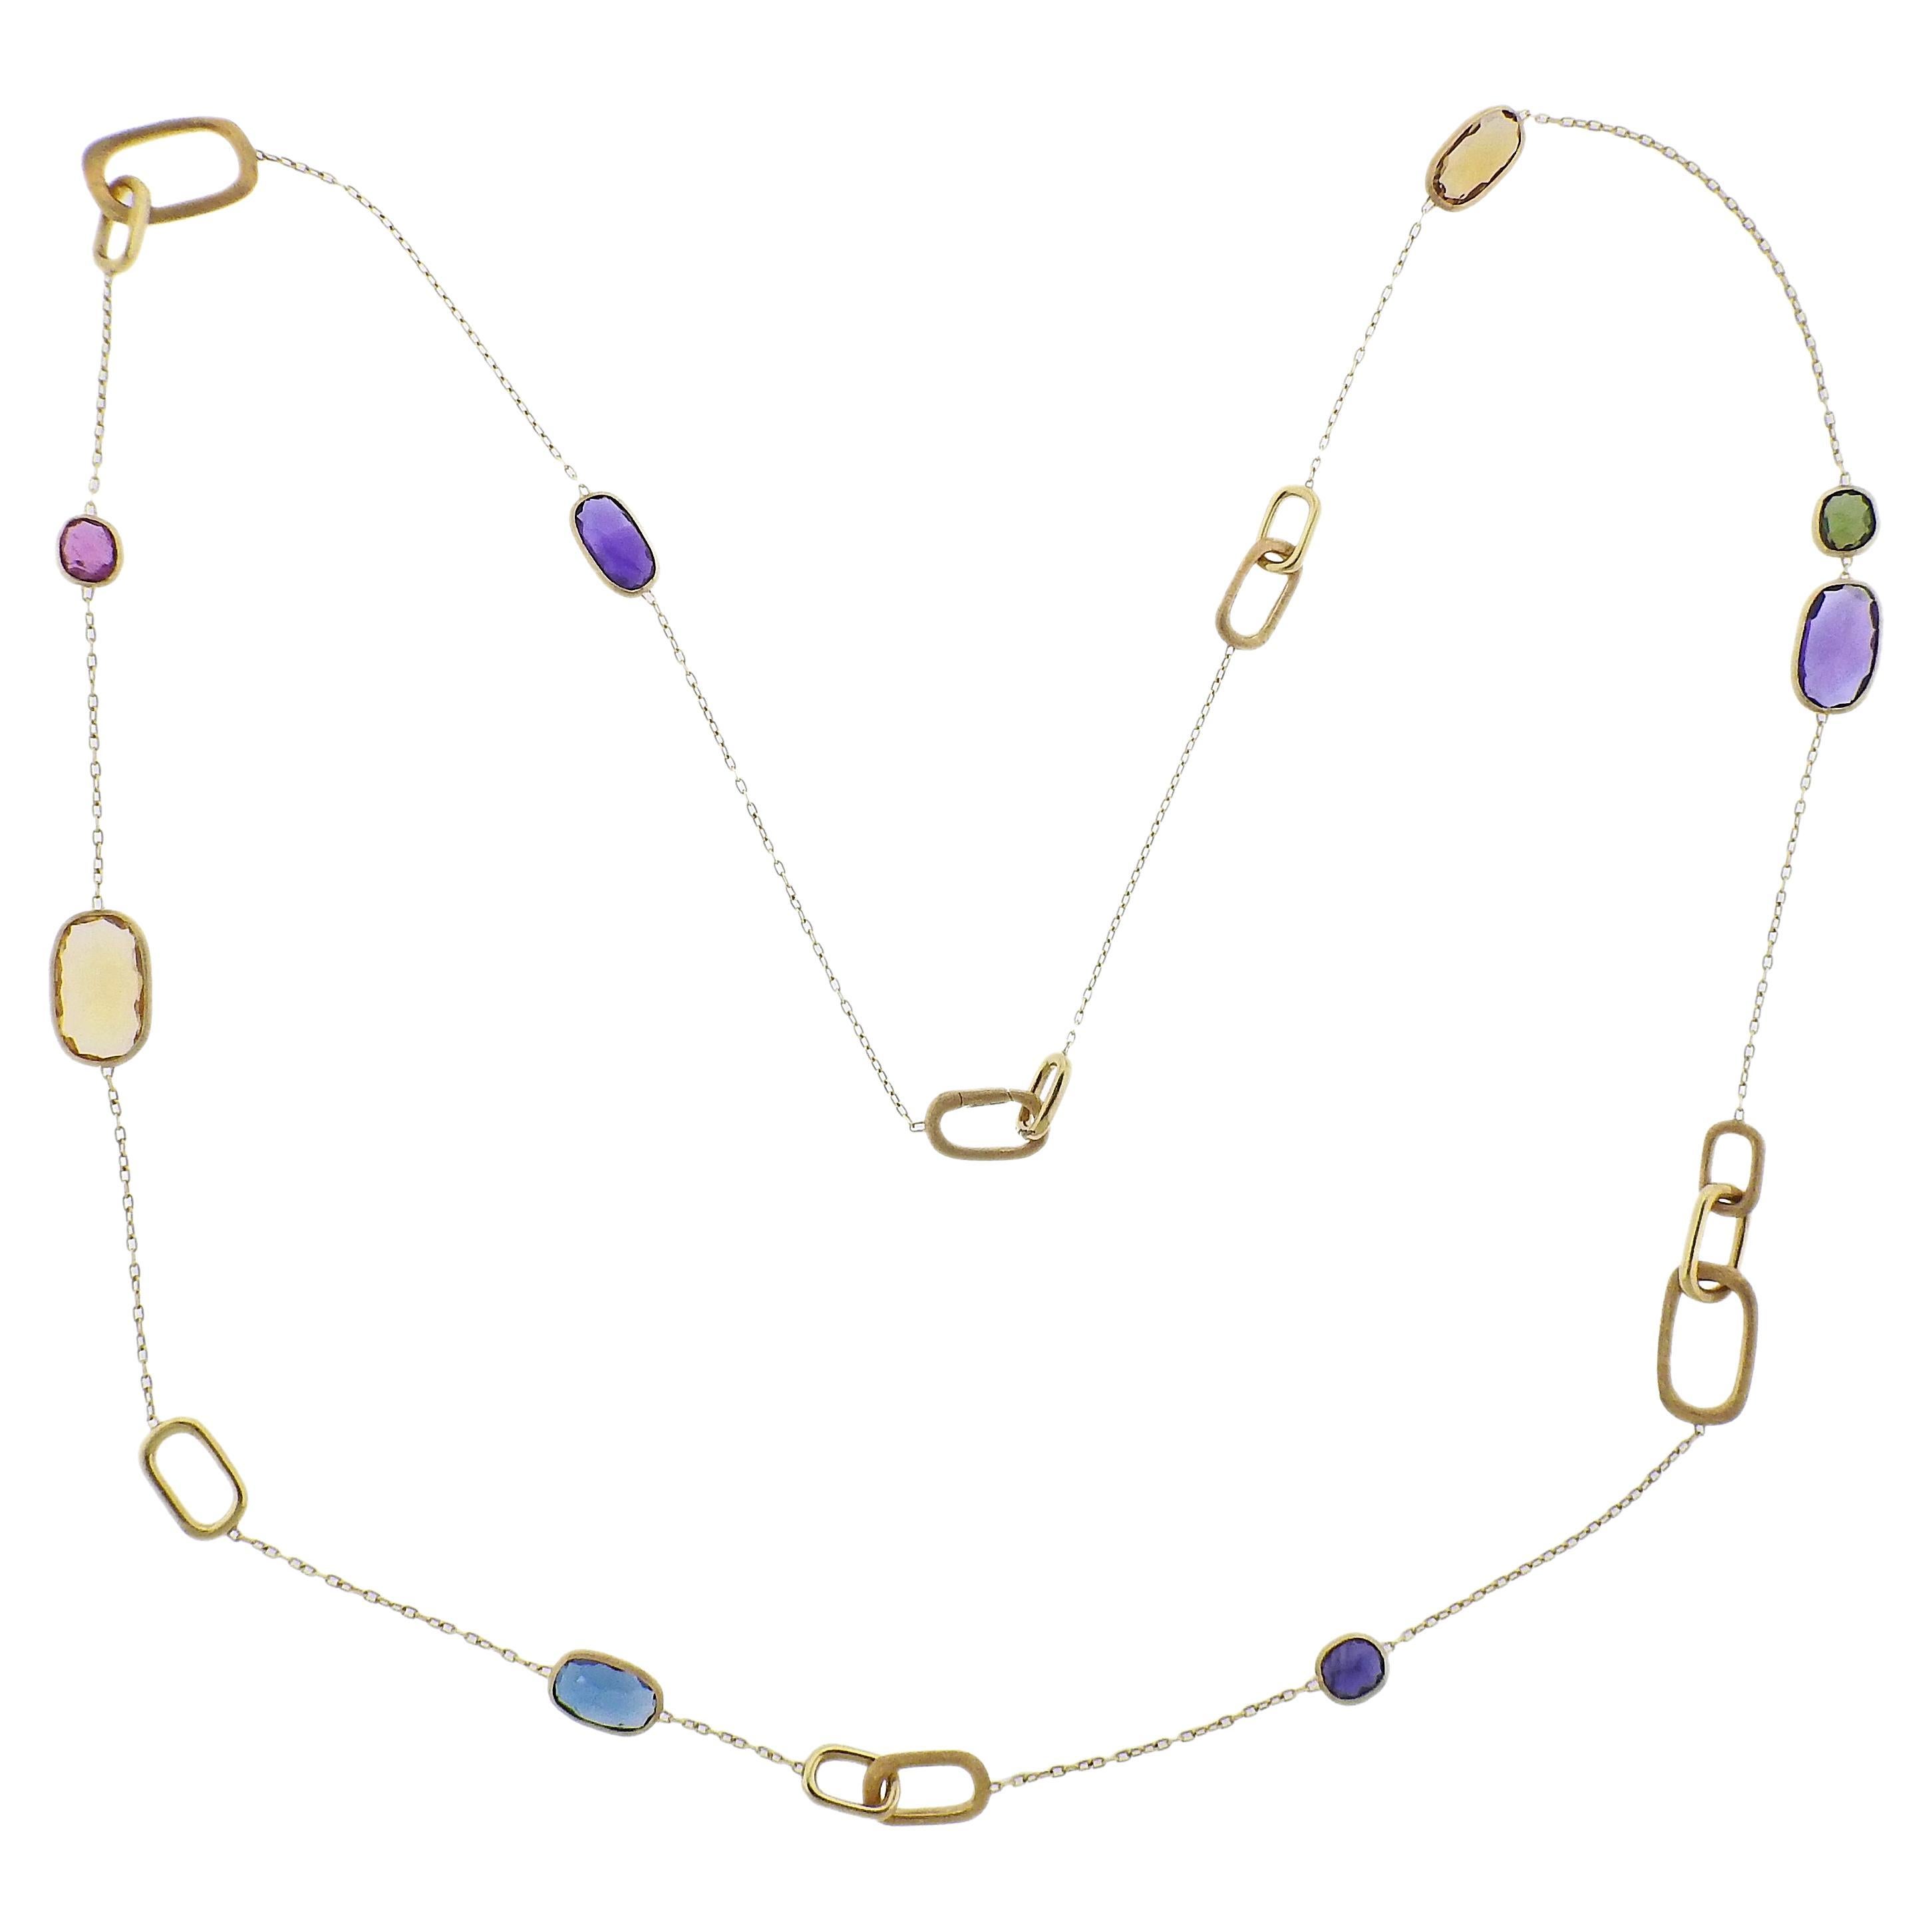 Marco Bicego Murano 18K Gold Mix Gemstone Long Link Necklace For Sale